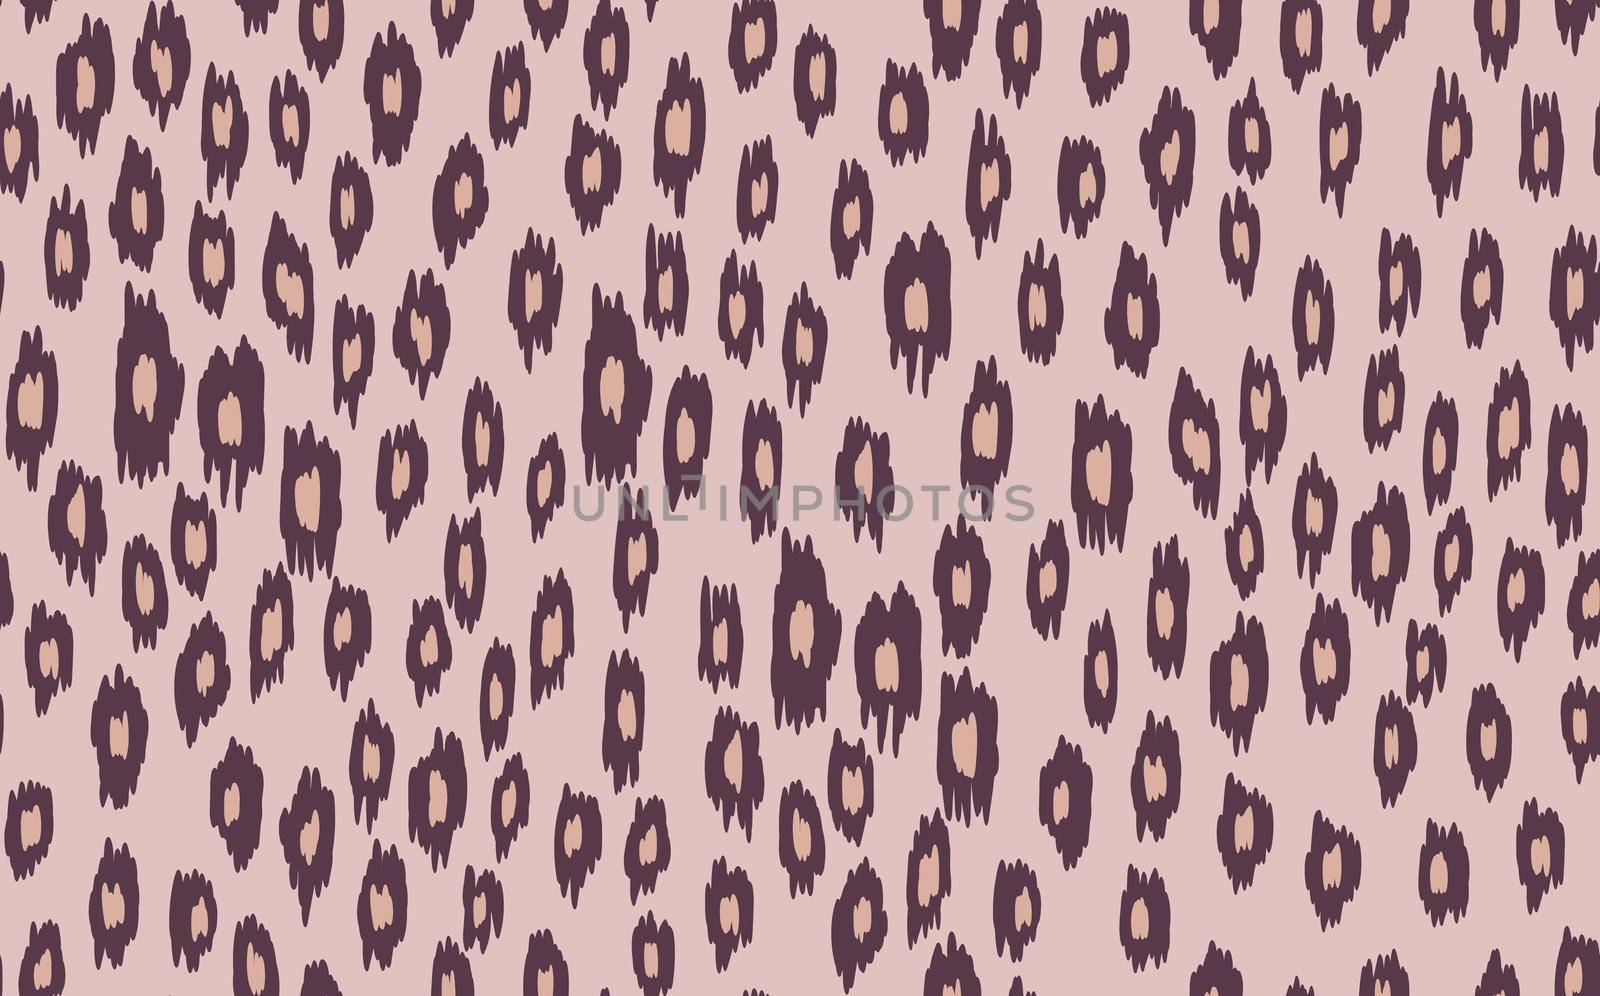 Abstract modern leopard seamless pattern. Animals trendy background. Beige and brown decorative vector stock illustration for print, card, postcard, fabric, textile. Modern ornament of stylized skin by allaku